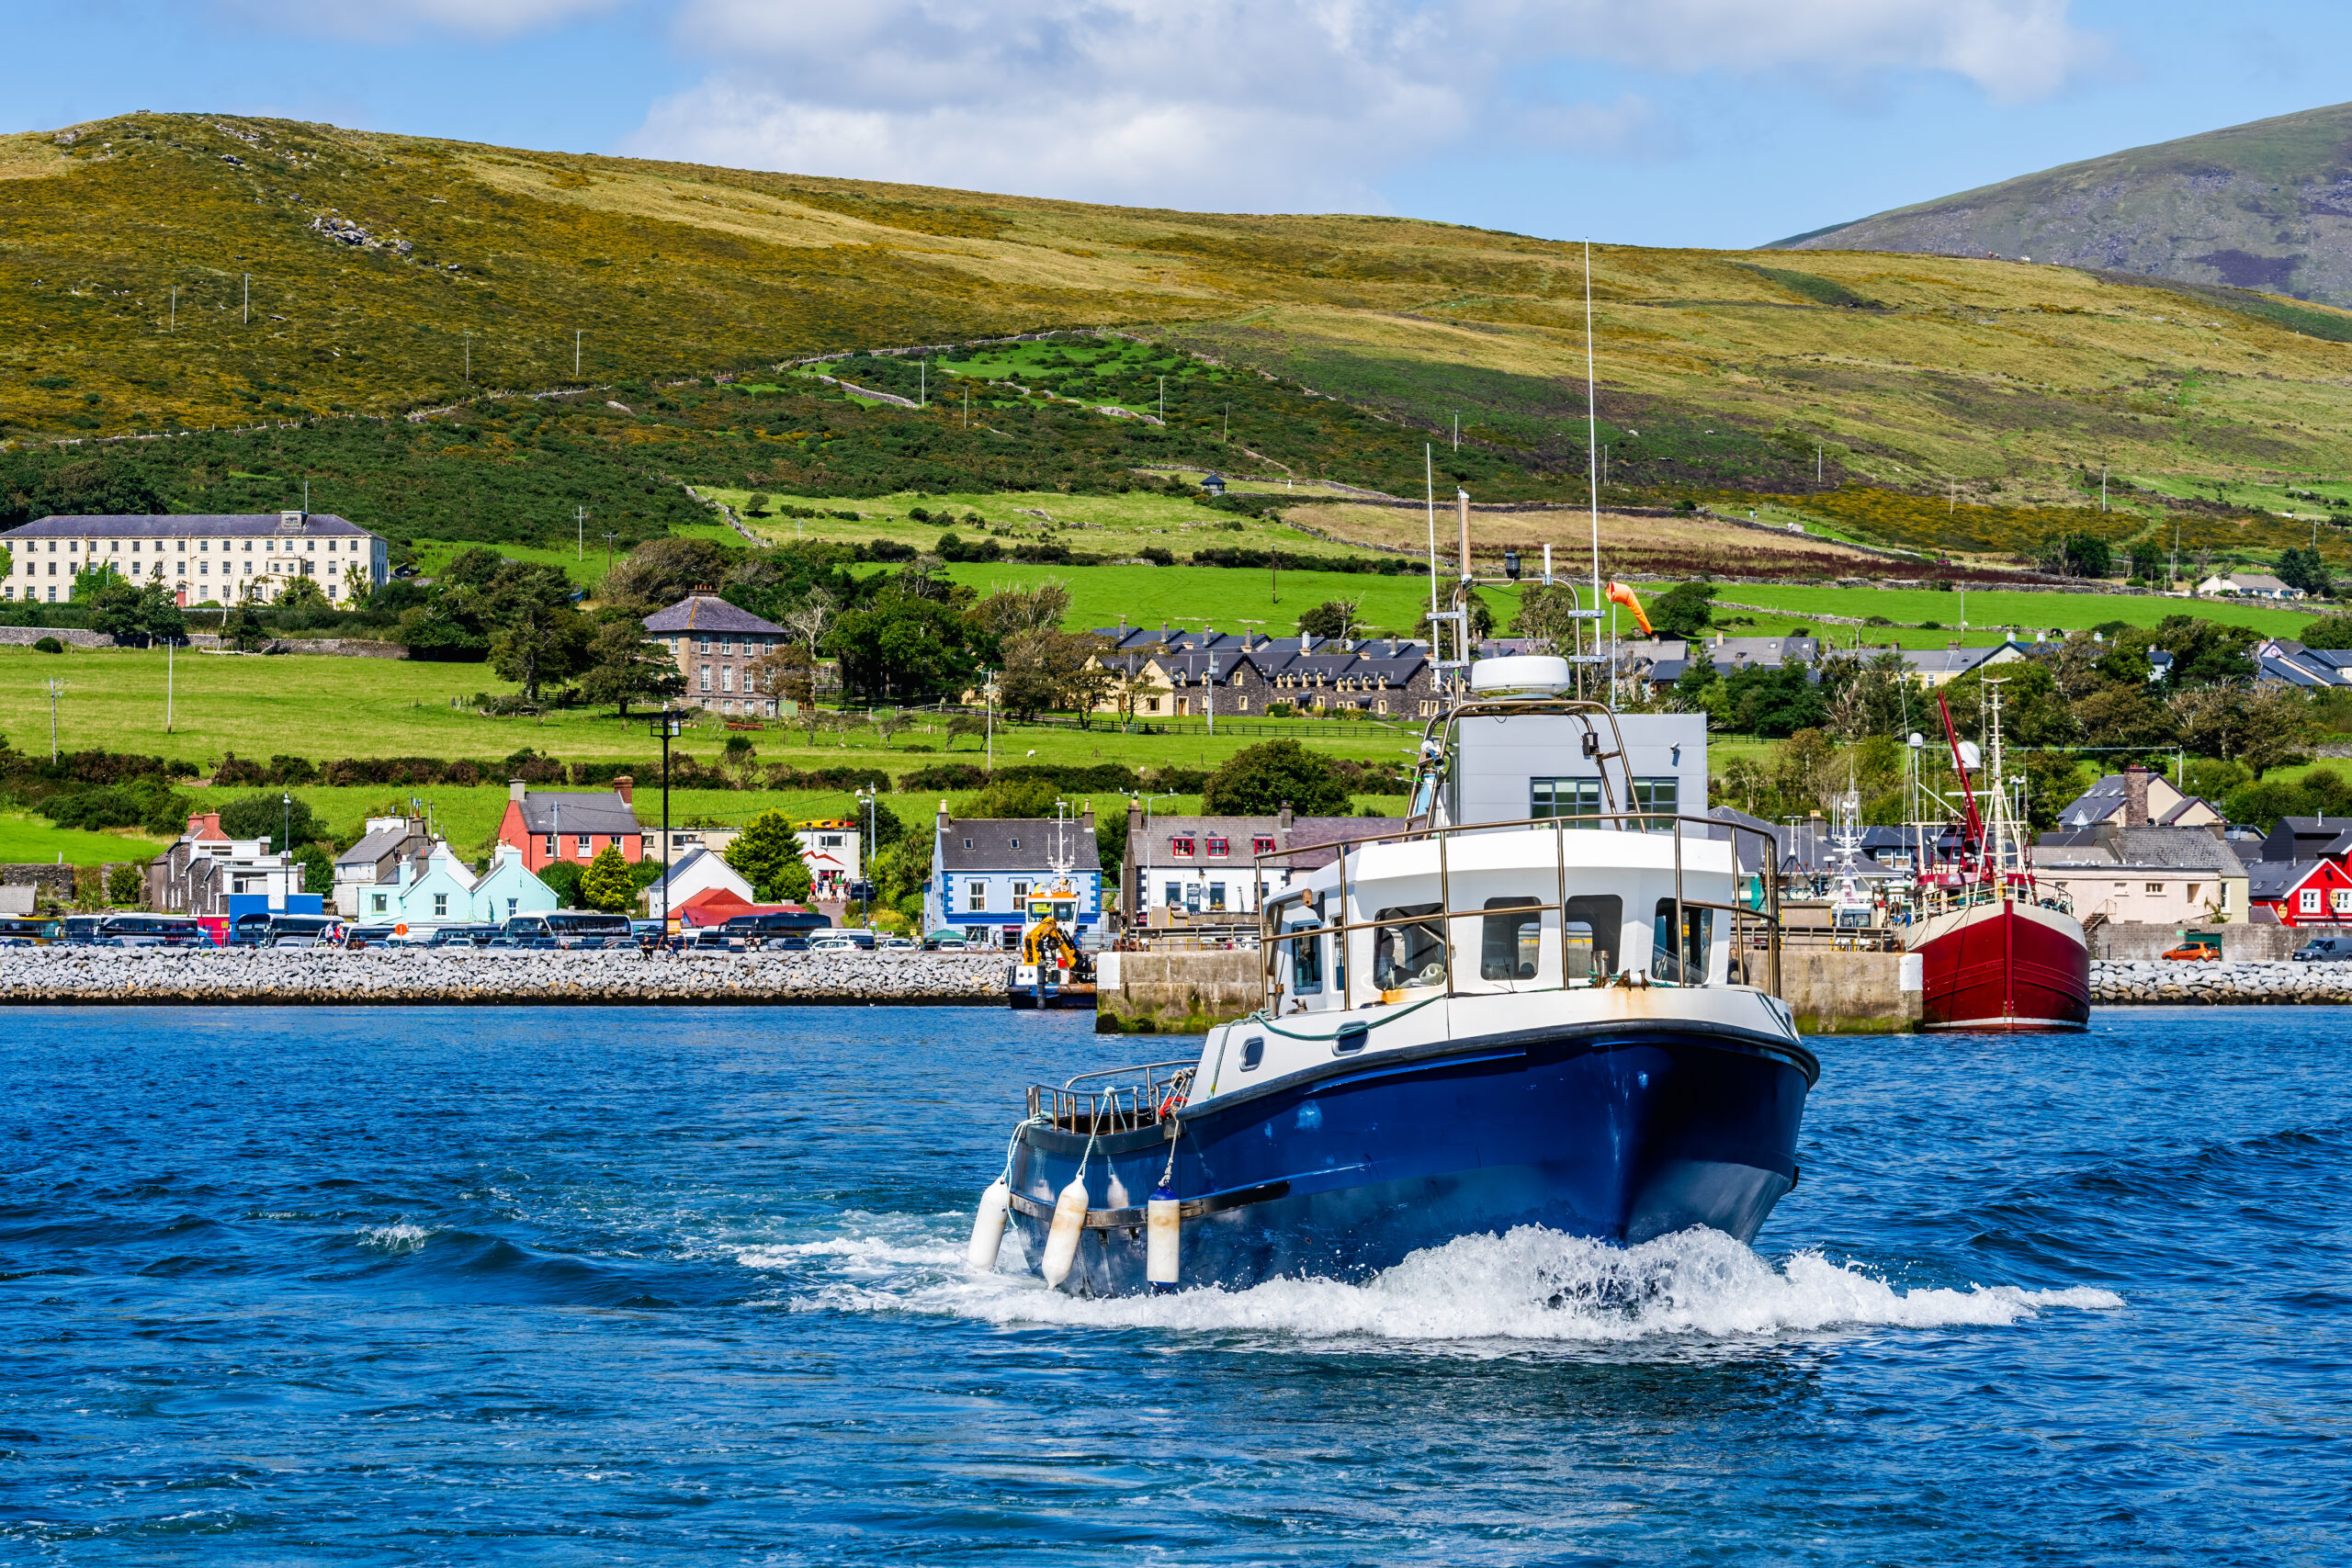 A small boat cutting through the deep blue waters of Dingle. A cute small town and rolling green hills are visible in the background. 